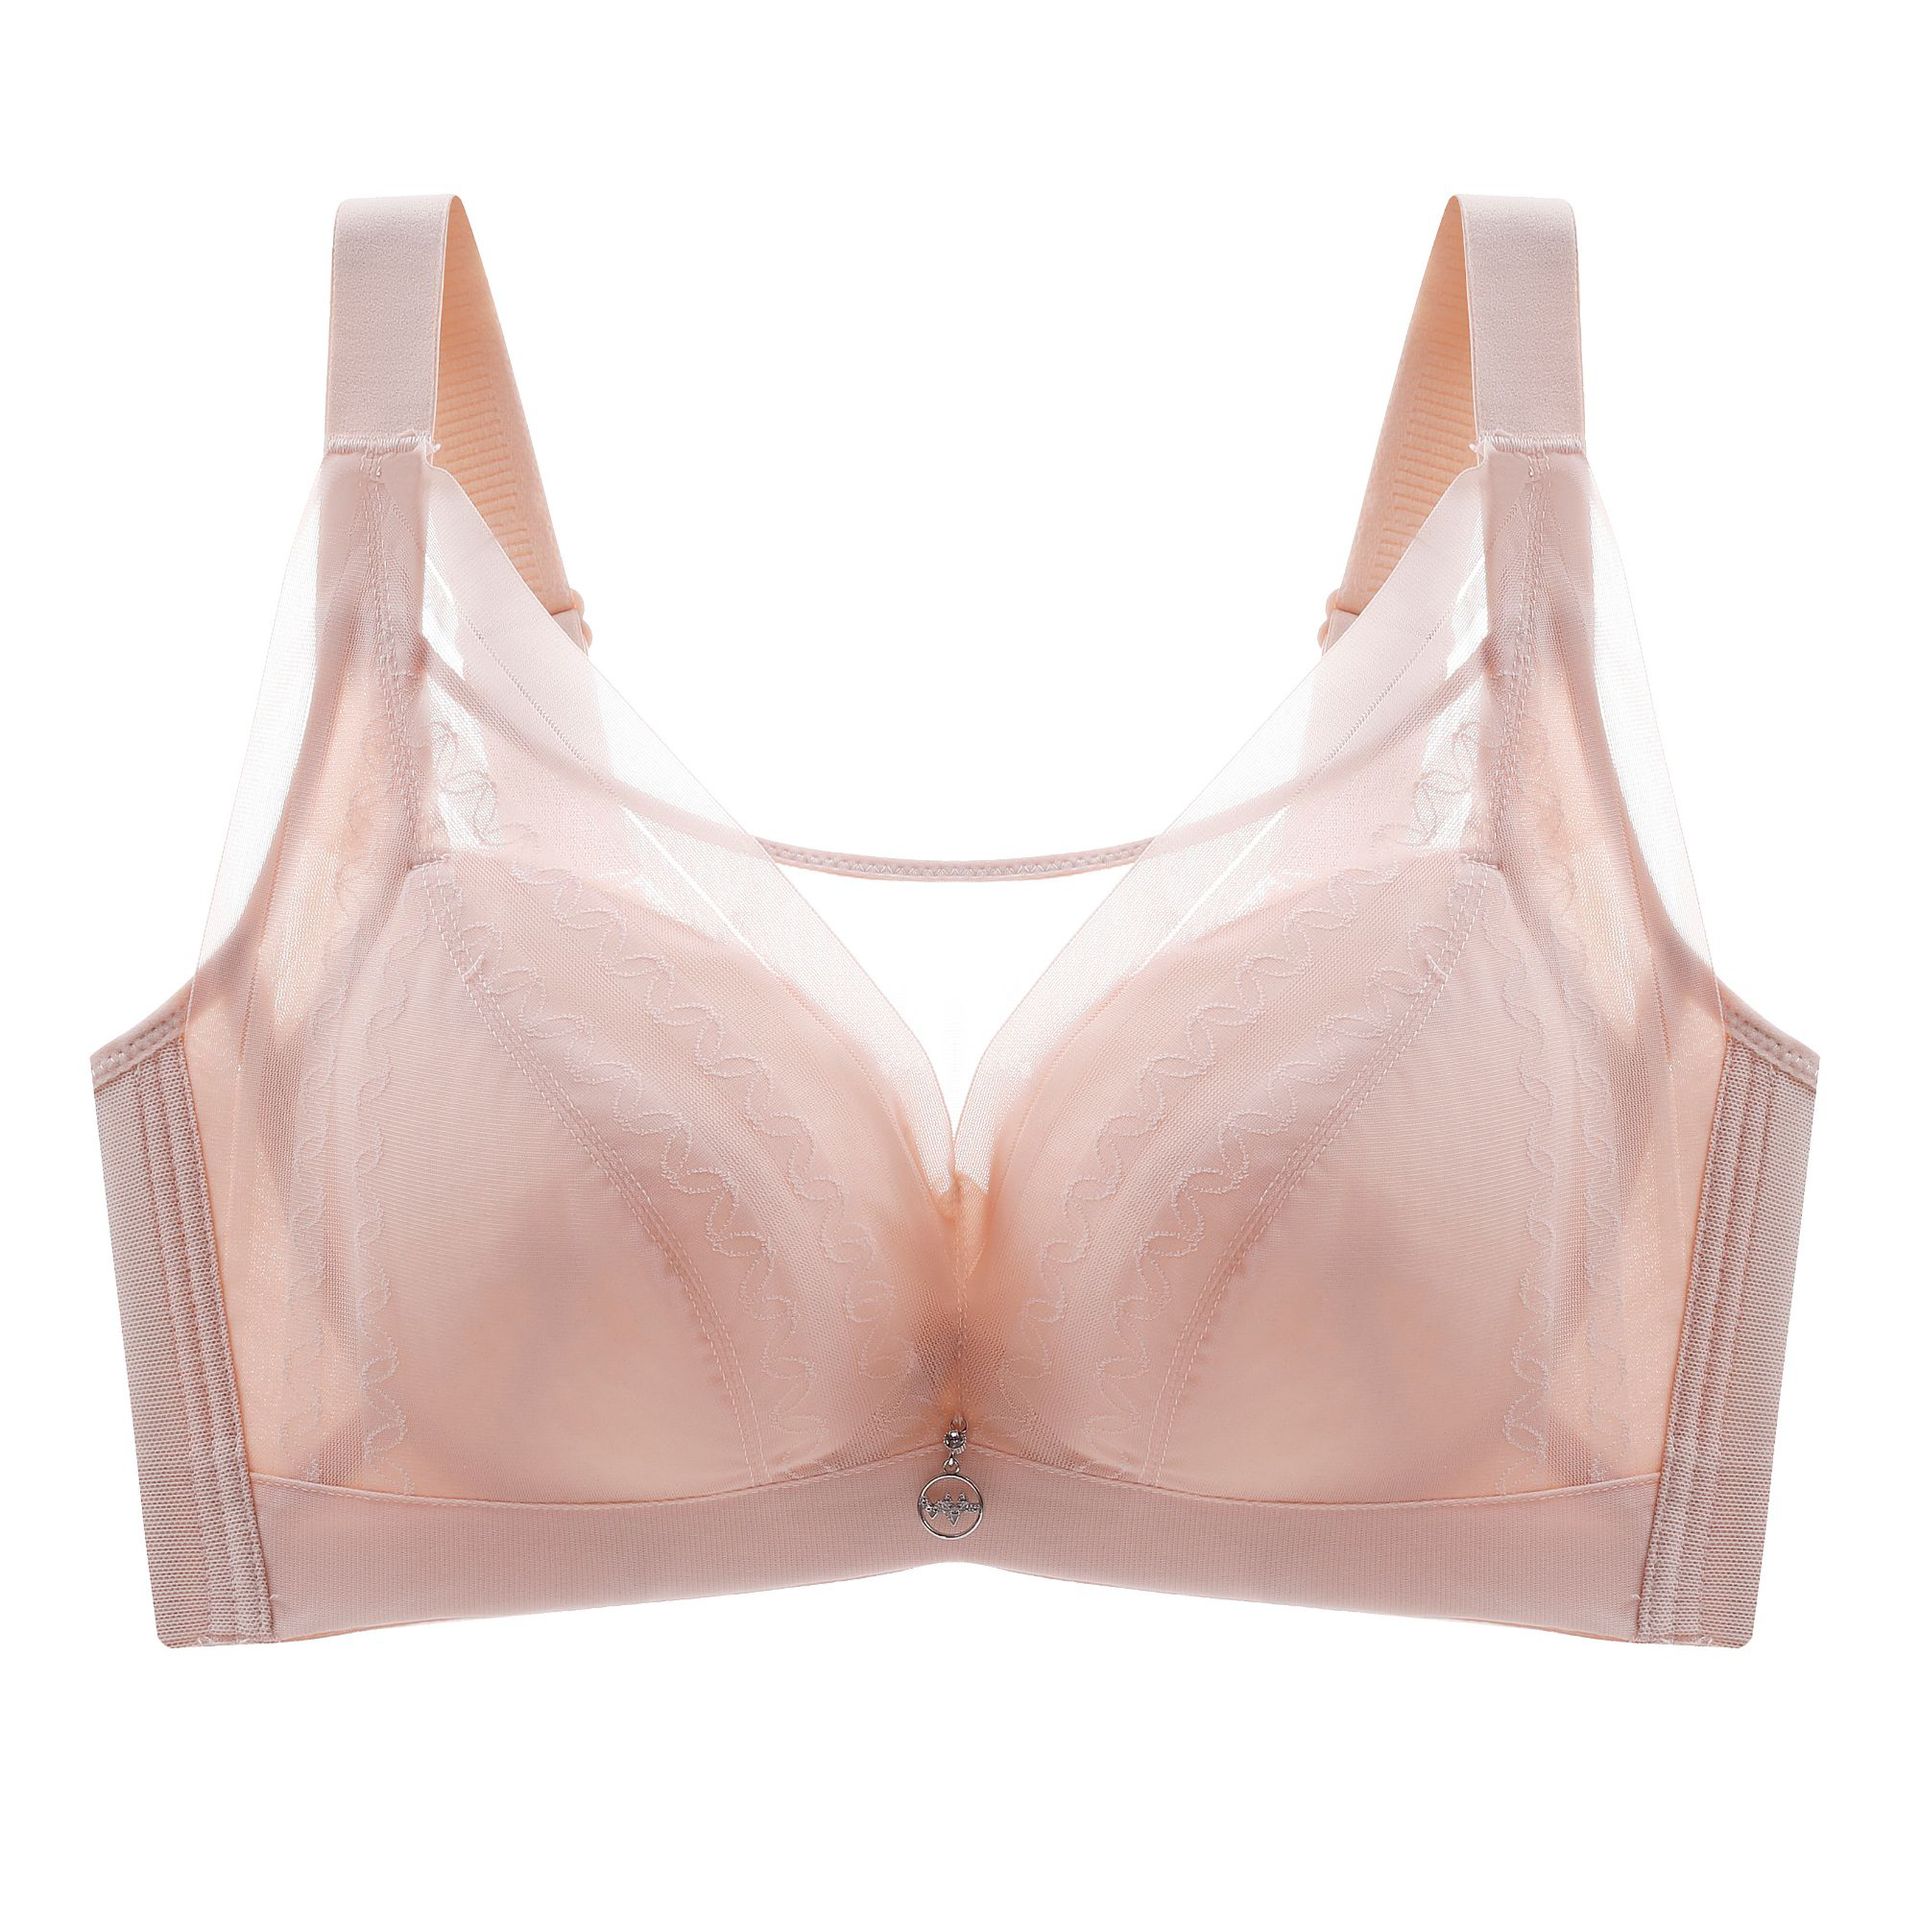 Plus Size Ultra-Thin Underwear Summer Big Chest Small Push up and Anti-Sagging Women's Bra Tube Top Full Coverage Adjusting Bra